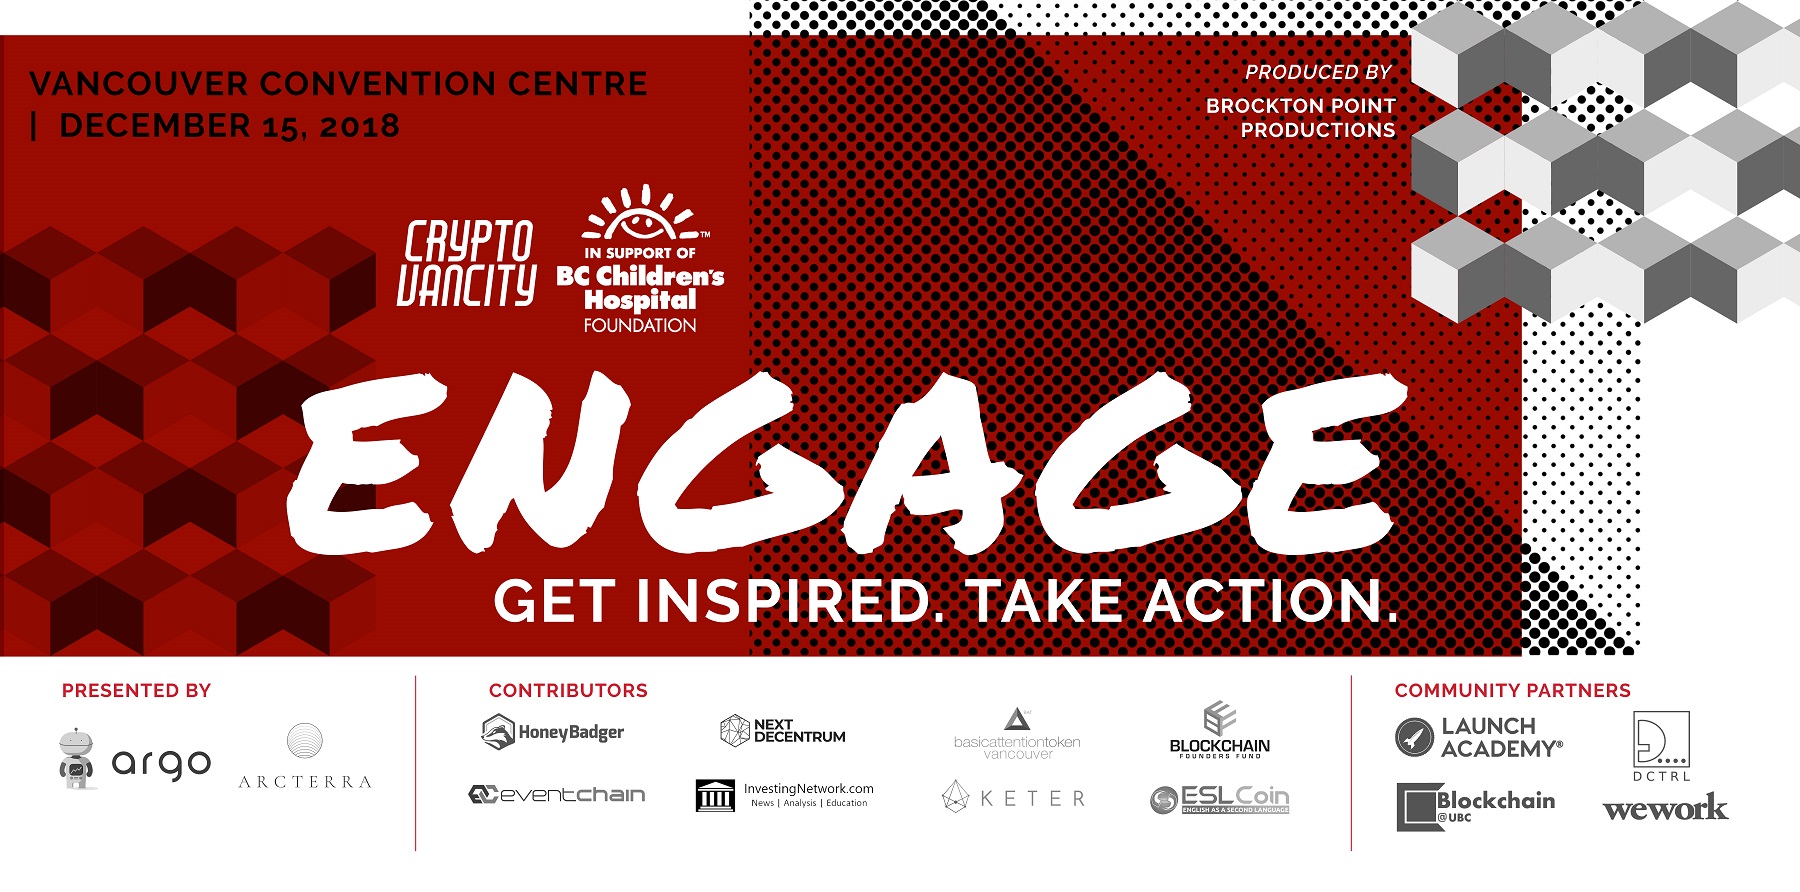 Engage Vancouver 2018 Get Inspired. Take Action.